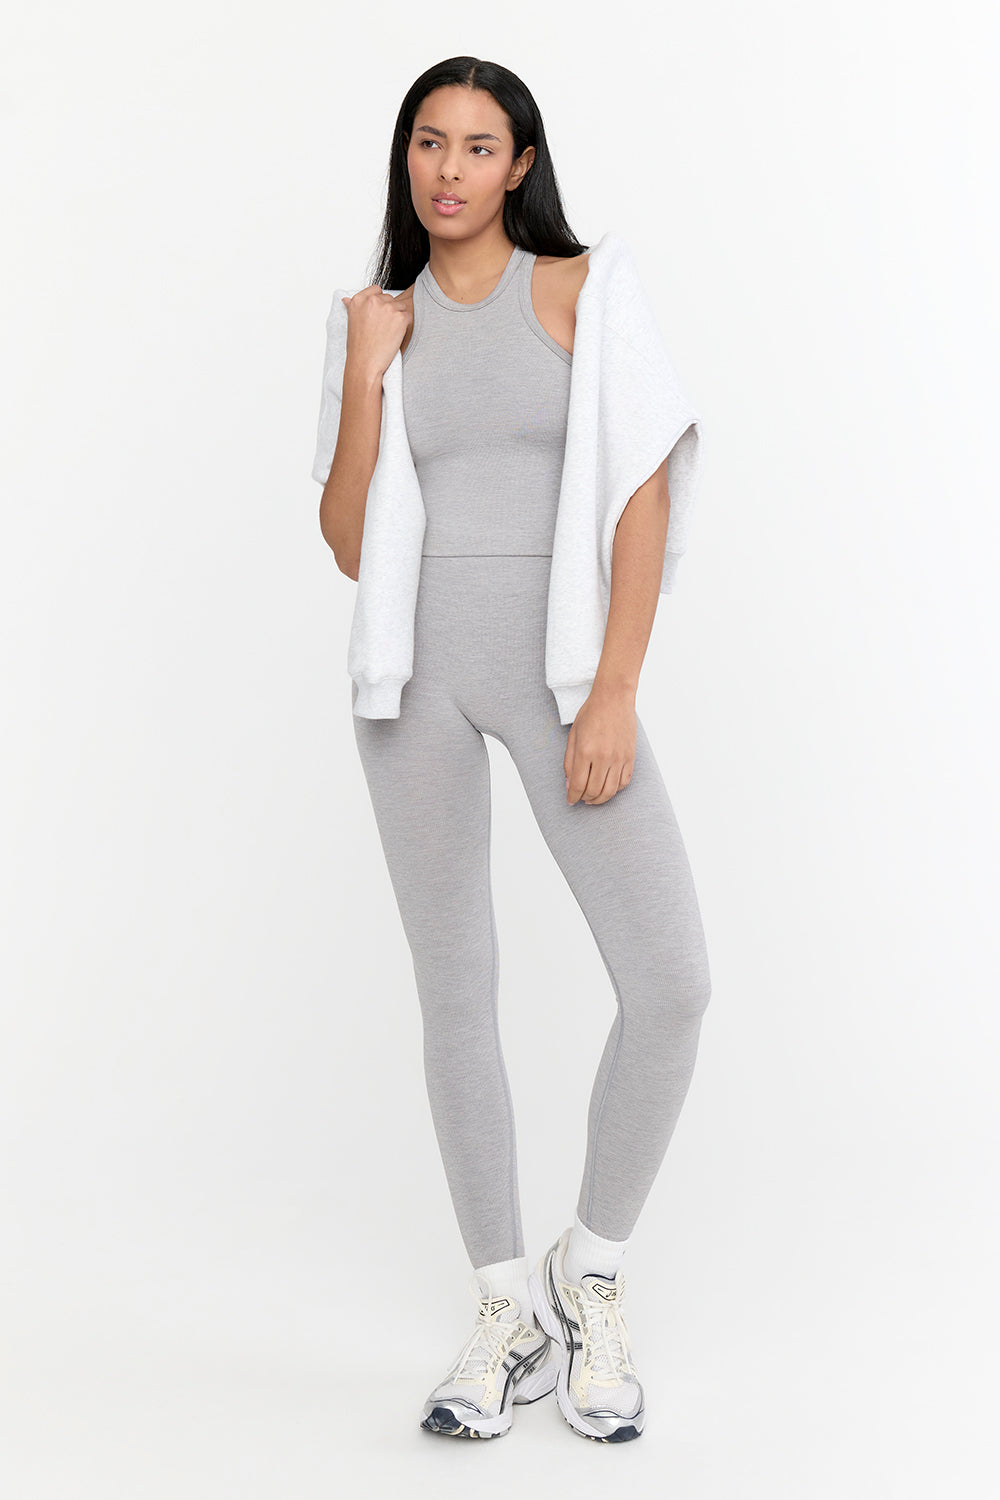 Brushing it Off Ribbed Seamless Workout Leggings – Sunday's Best Boutique